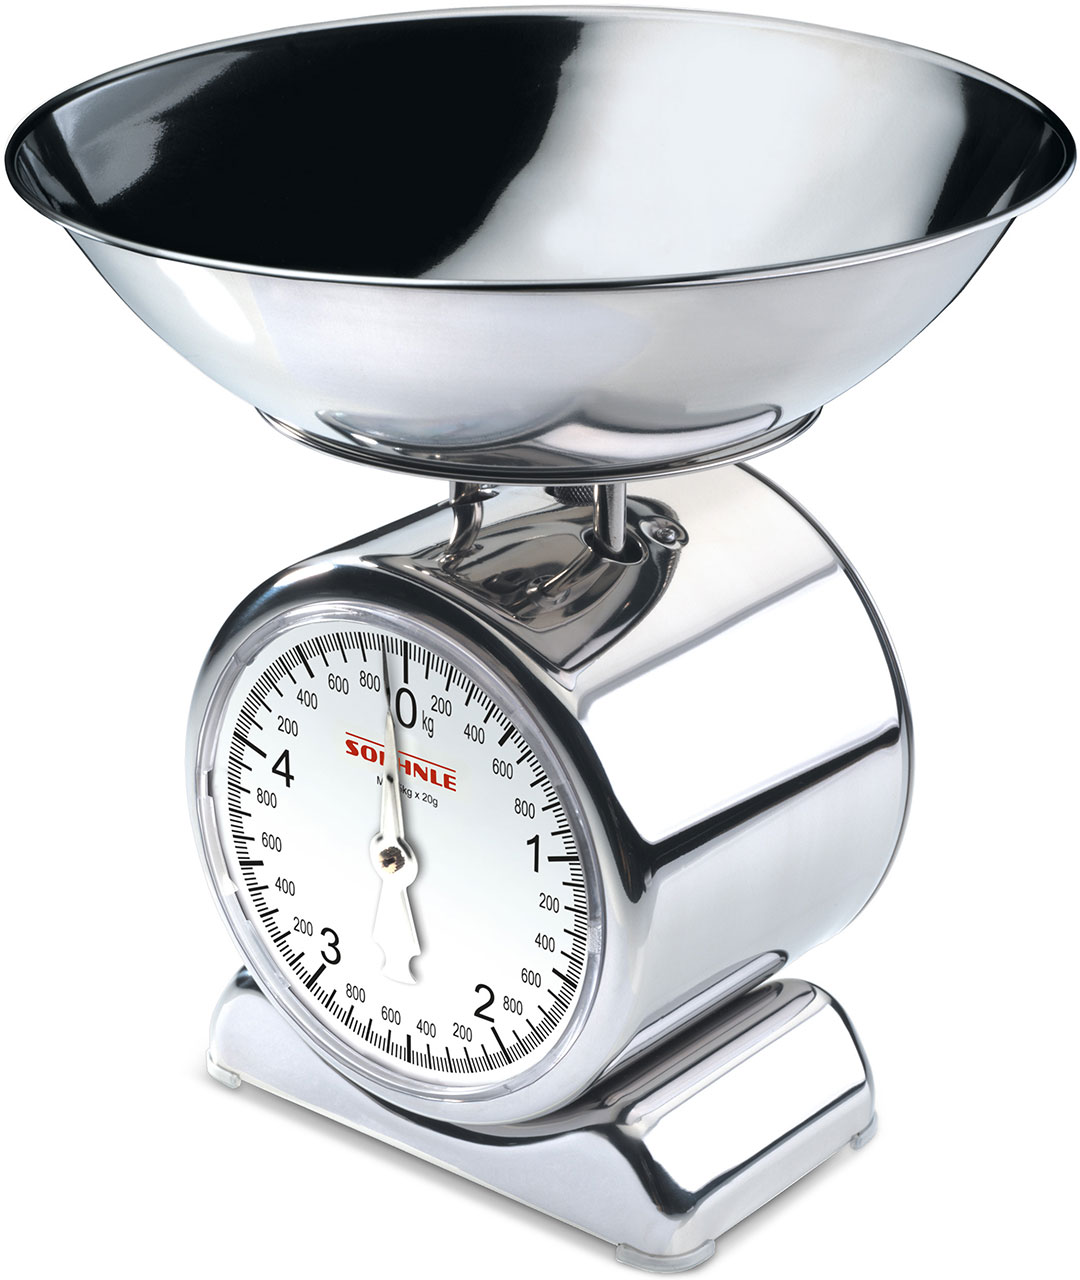 Soehnle Silvia Mechanical Kitchen Scale 5kg Stainless Steel 65003